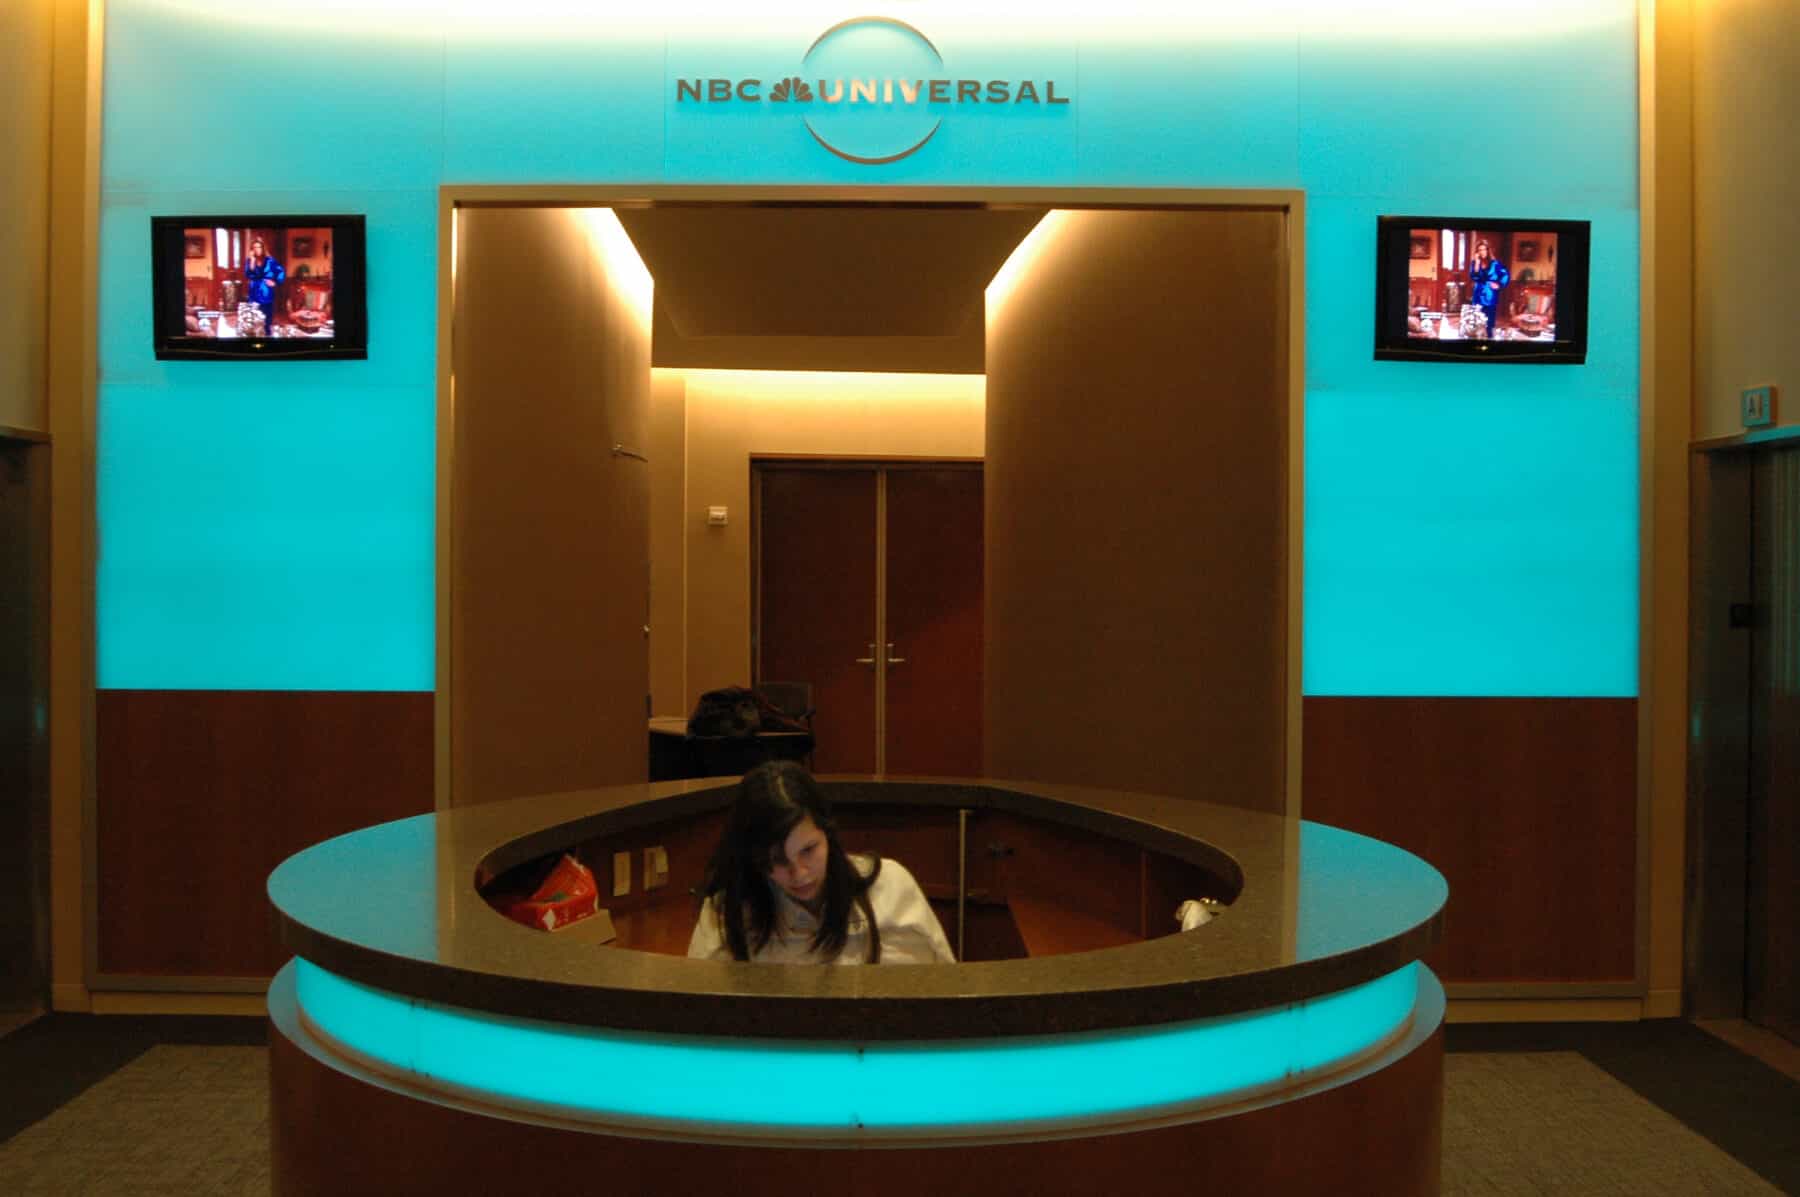 Architectural Backlit Glass Wall Panels and Circular Reception Desk for NBC Universal Studio at Rockefeller Center for Construction Specialty Projects by Commercial Builder & General Contractor Structural Enterprises